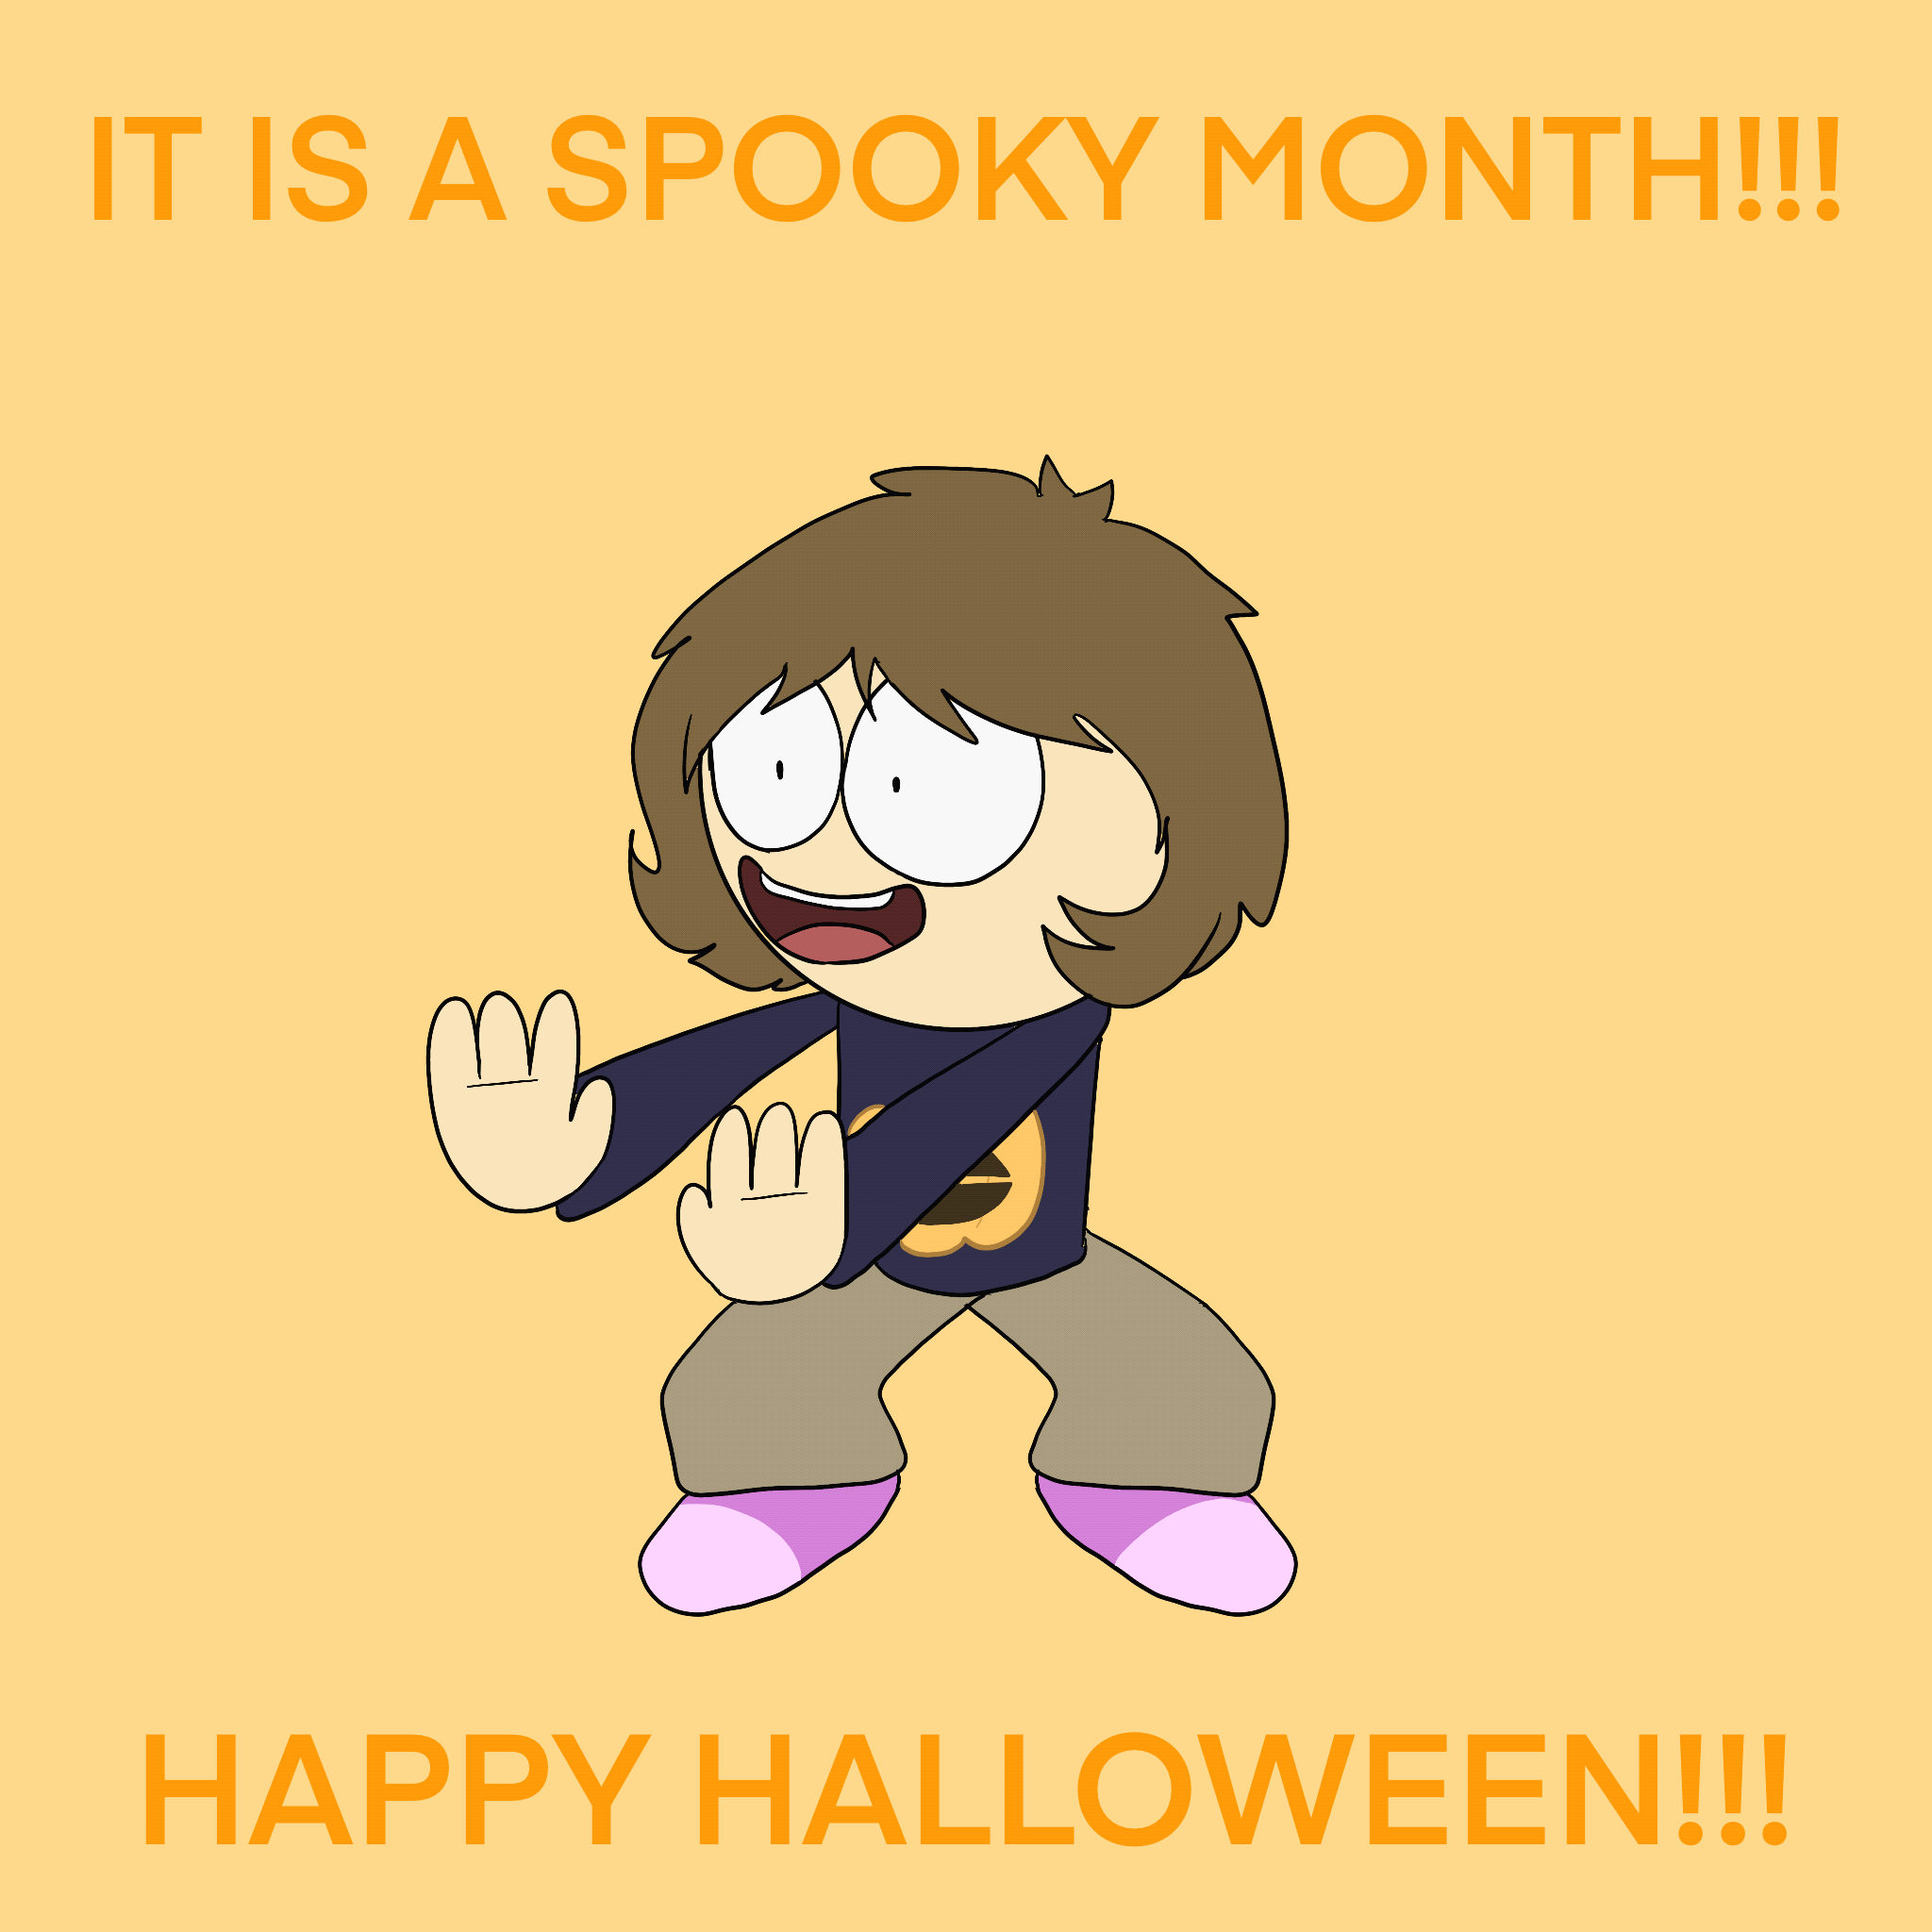 Scared Kevin (Spooky Month) by GoofyClowny on DeviantArt